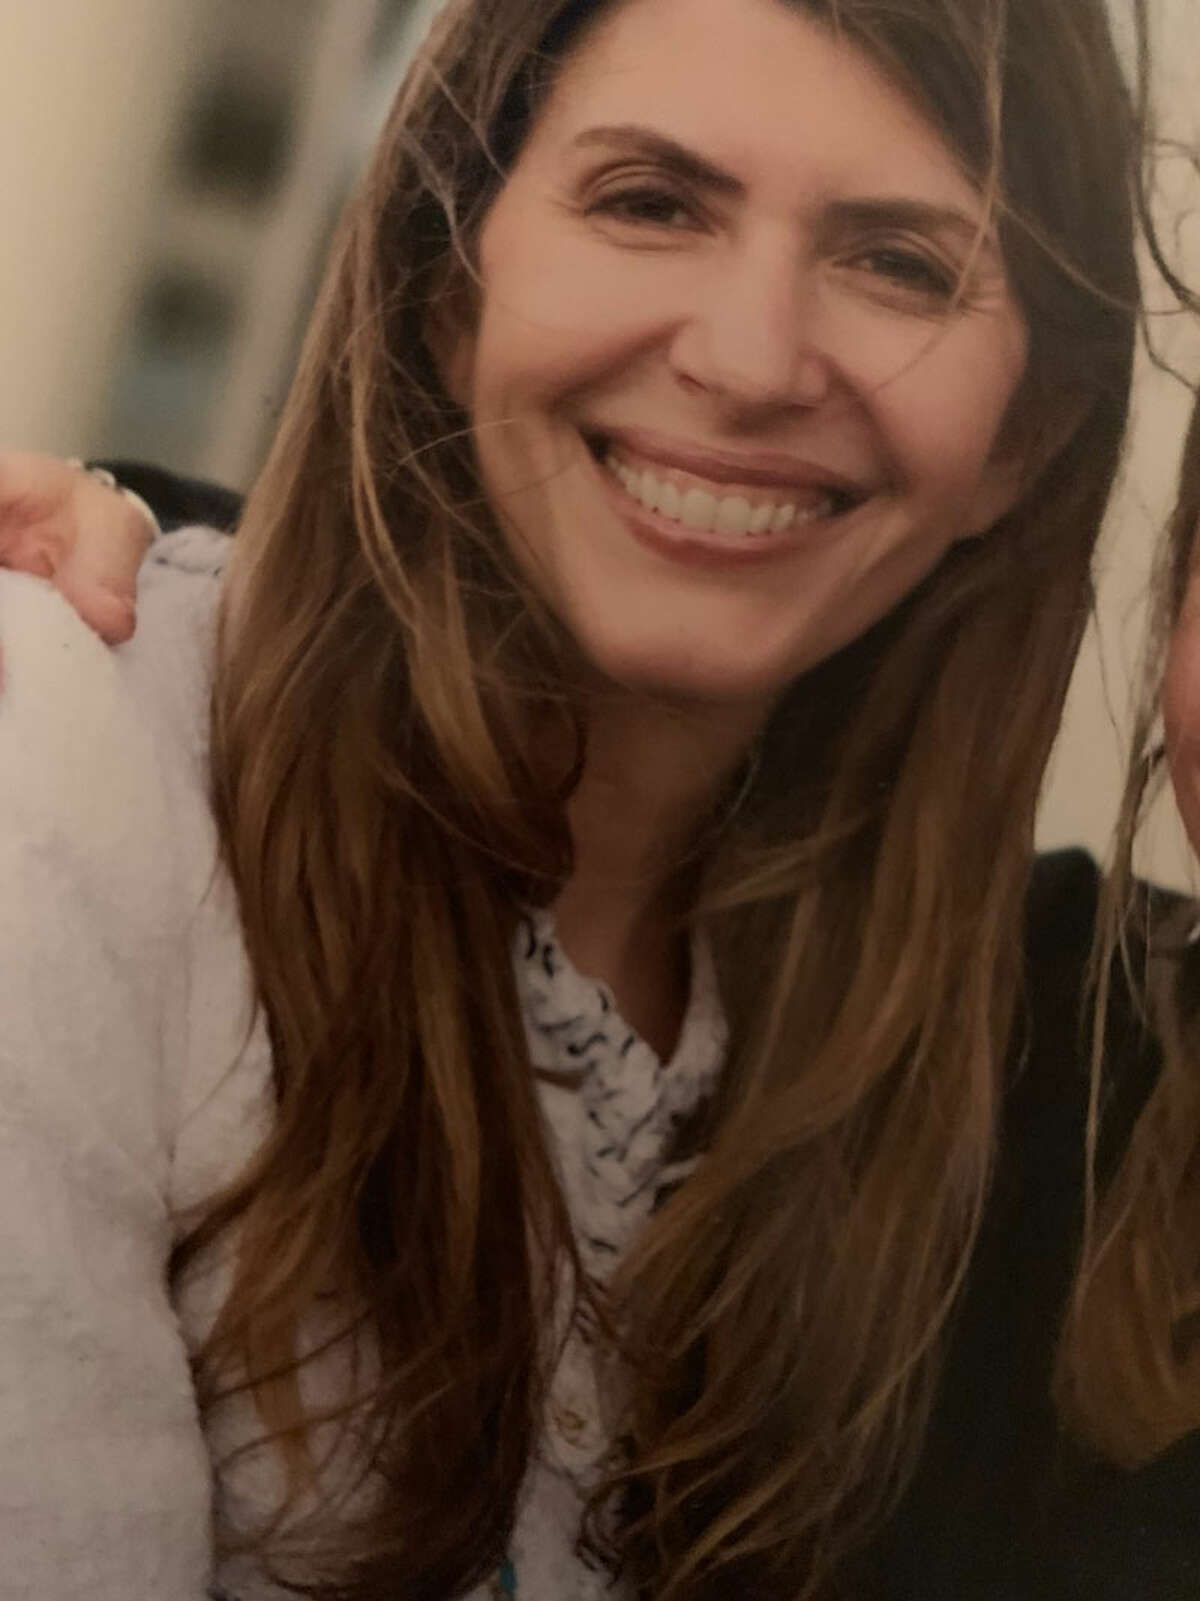 There is a request for residents of the towns of New Canaan, and Farmington, Conn to put a candle on their porches Monday night, June 3, 2019 for missing New Canaan woman Jennifer Dulos. Contributed photo